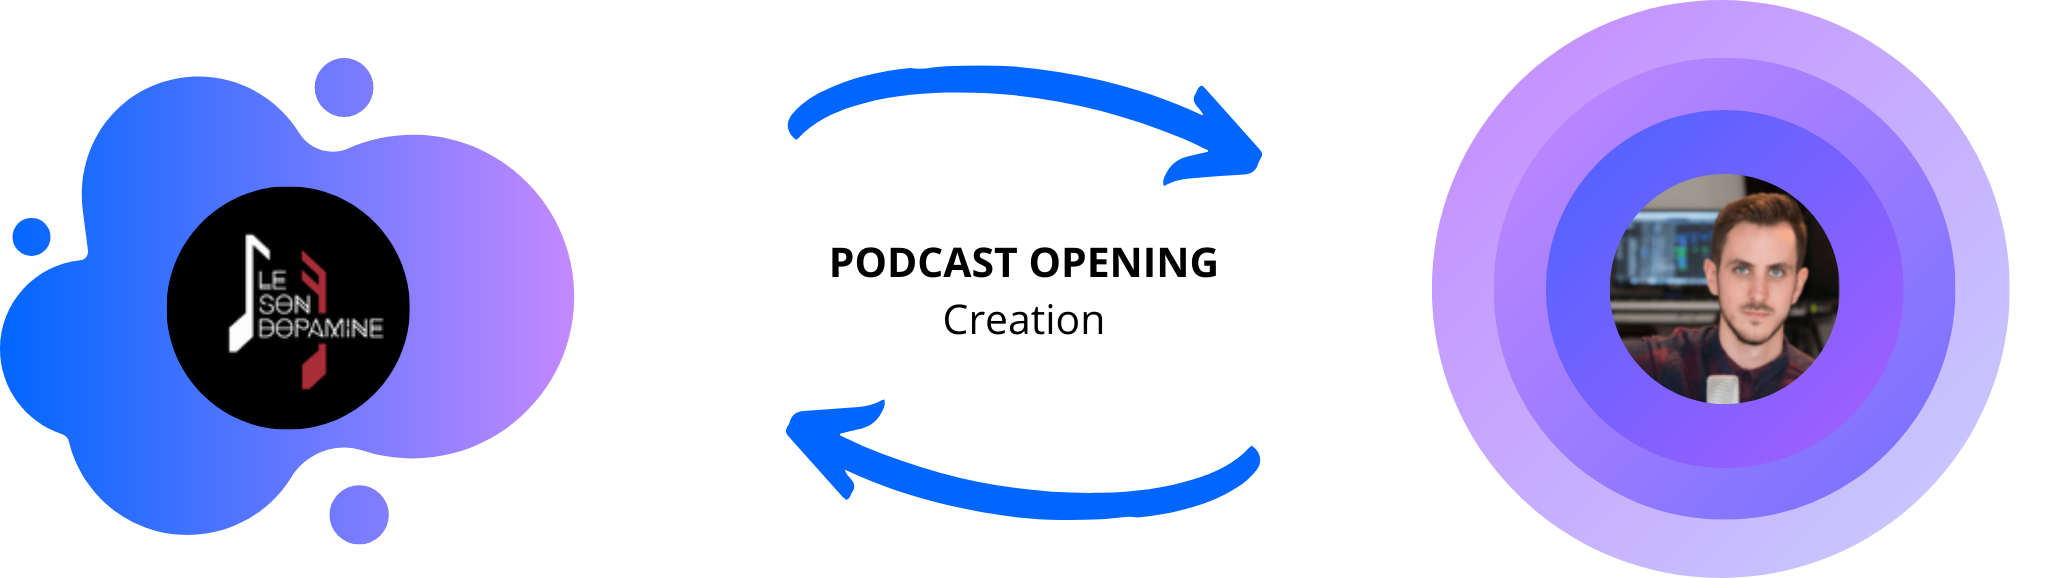 Creation of a podcast opening for le son dopamine